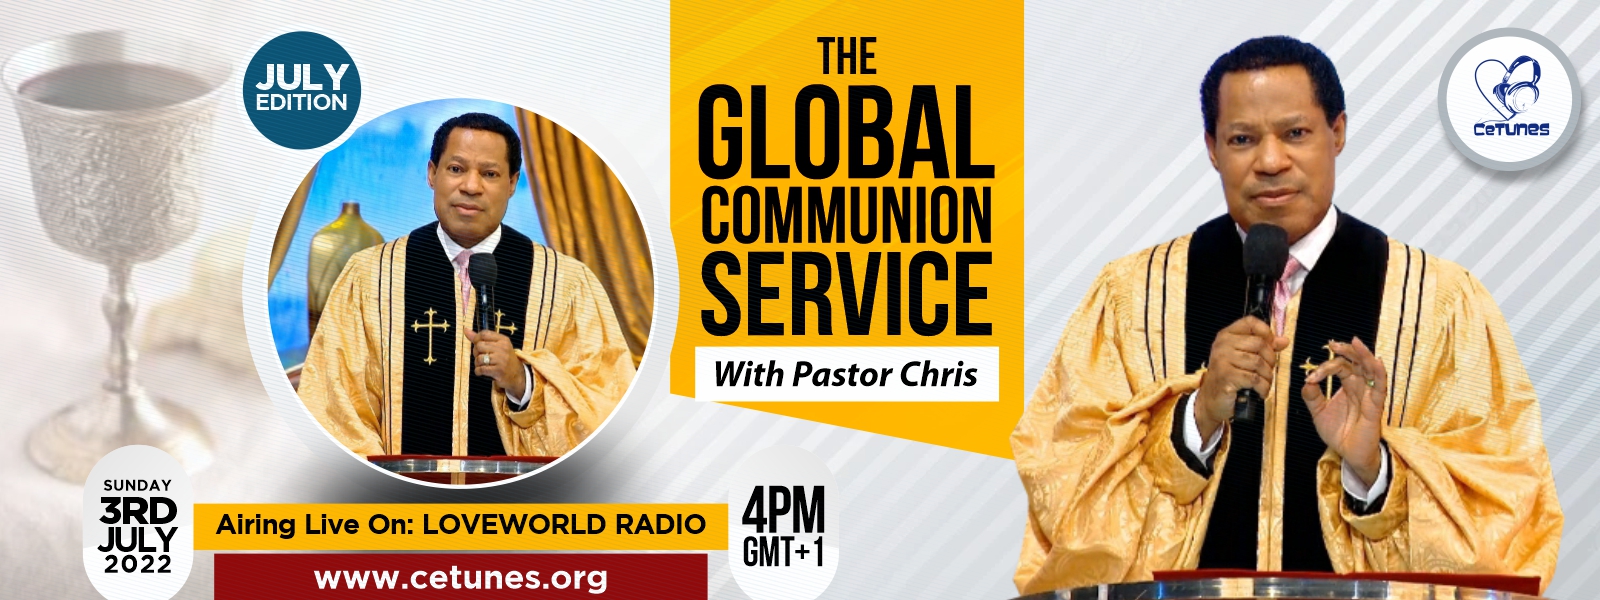 JULY GLOBAL COMMUNION SERVICE WITH PASTOR CHRIS